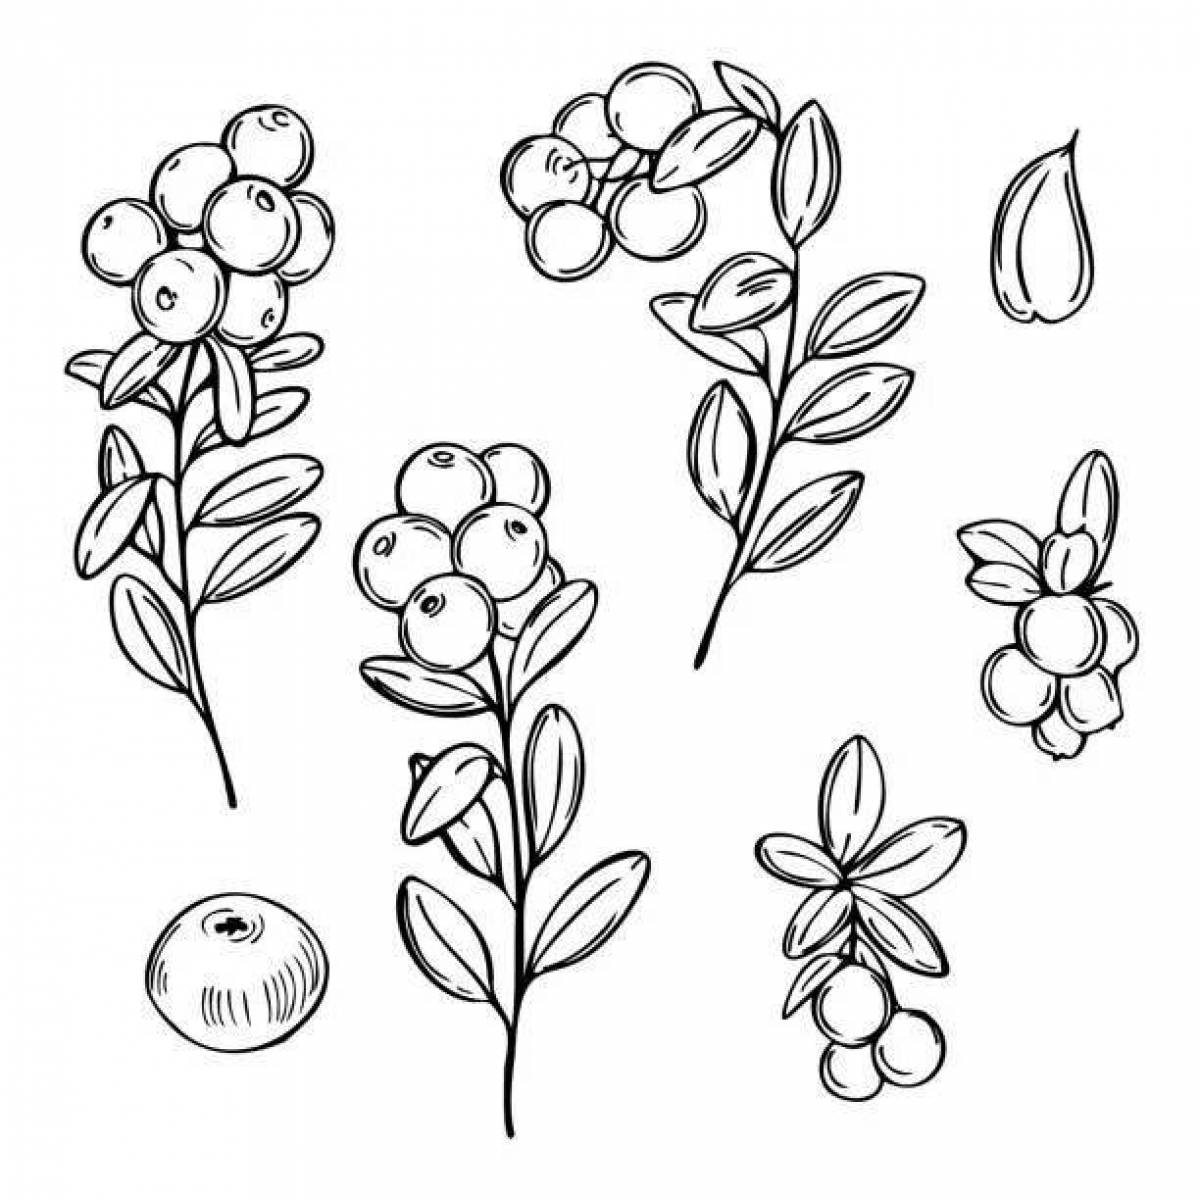 Cowberry coloring page